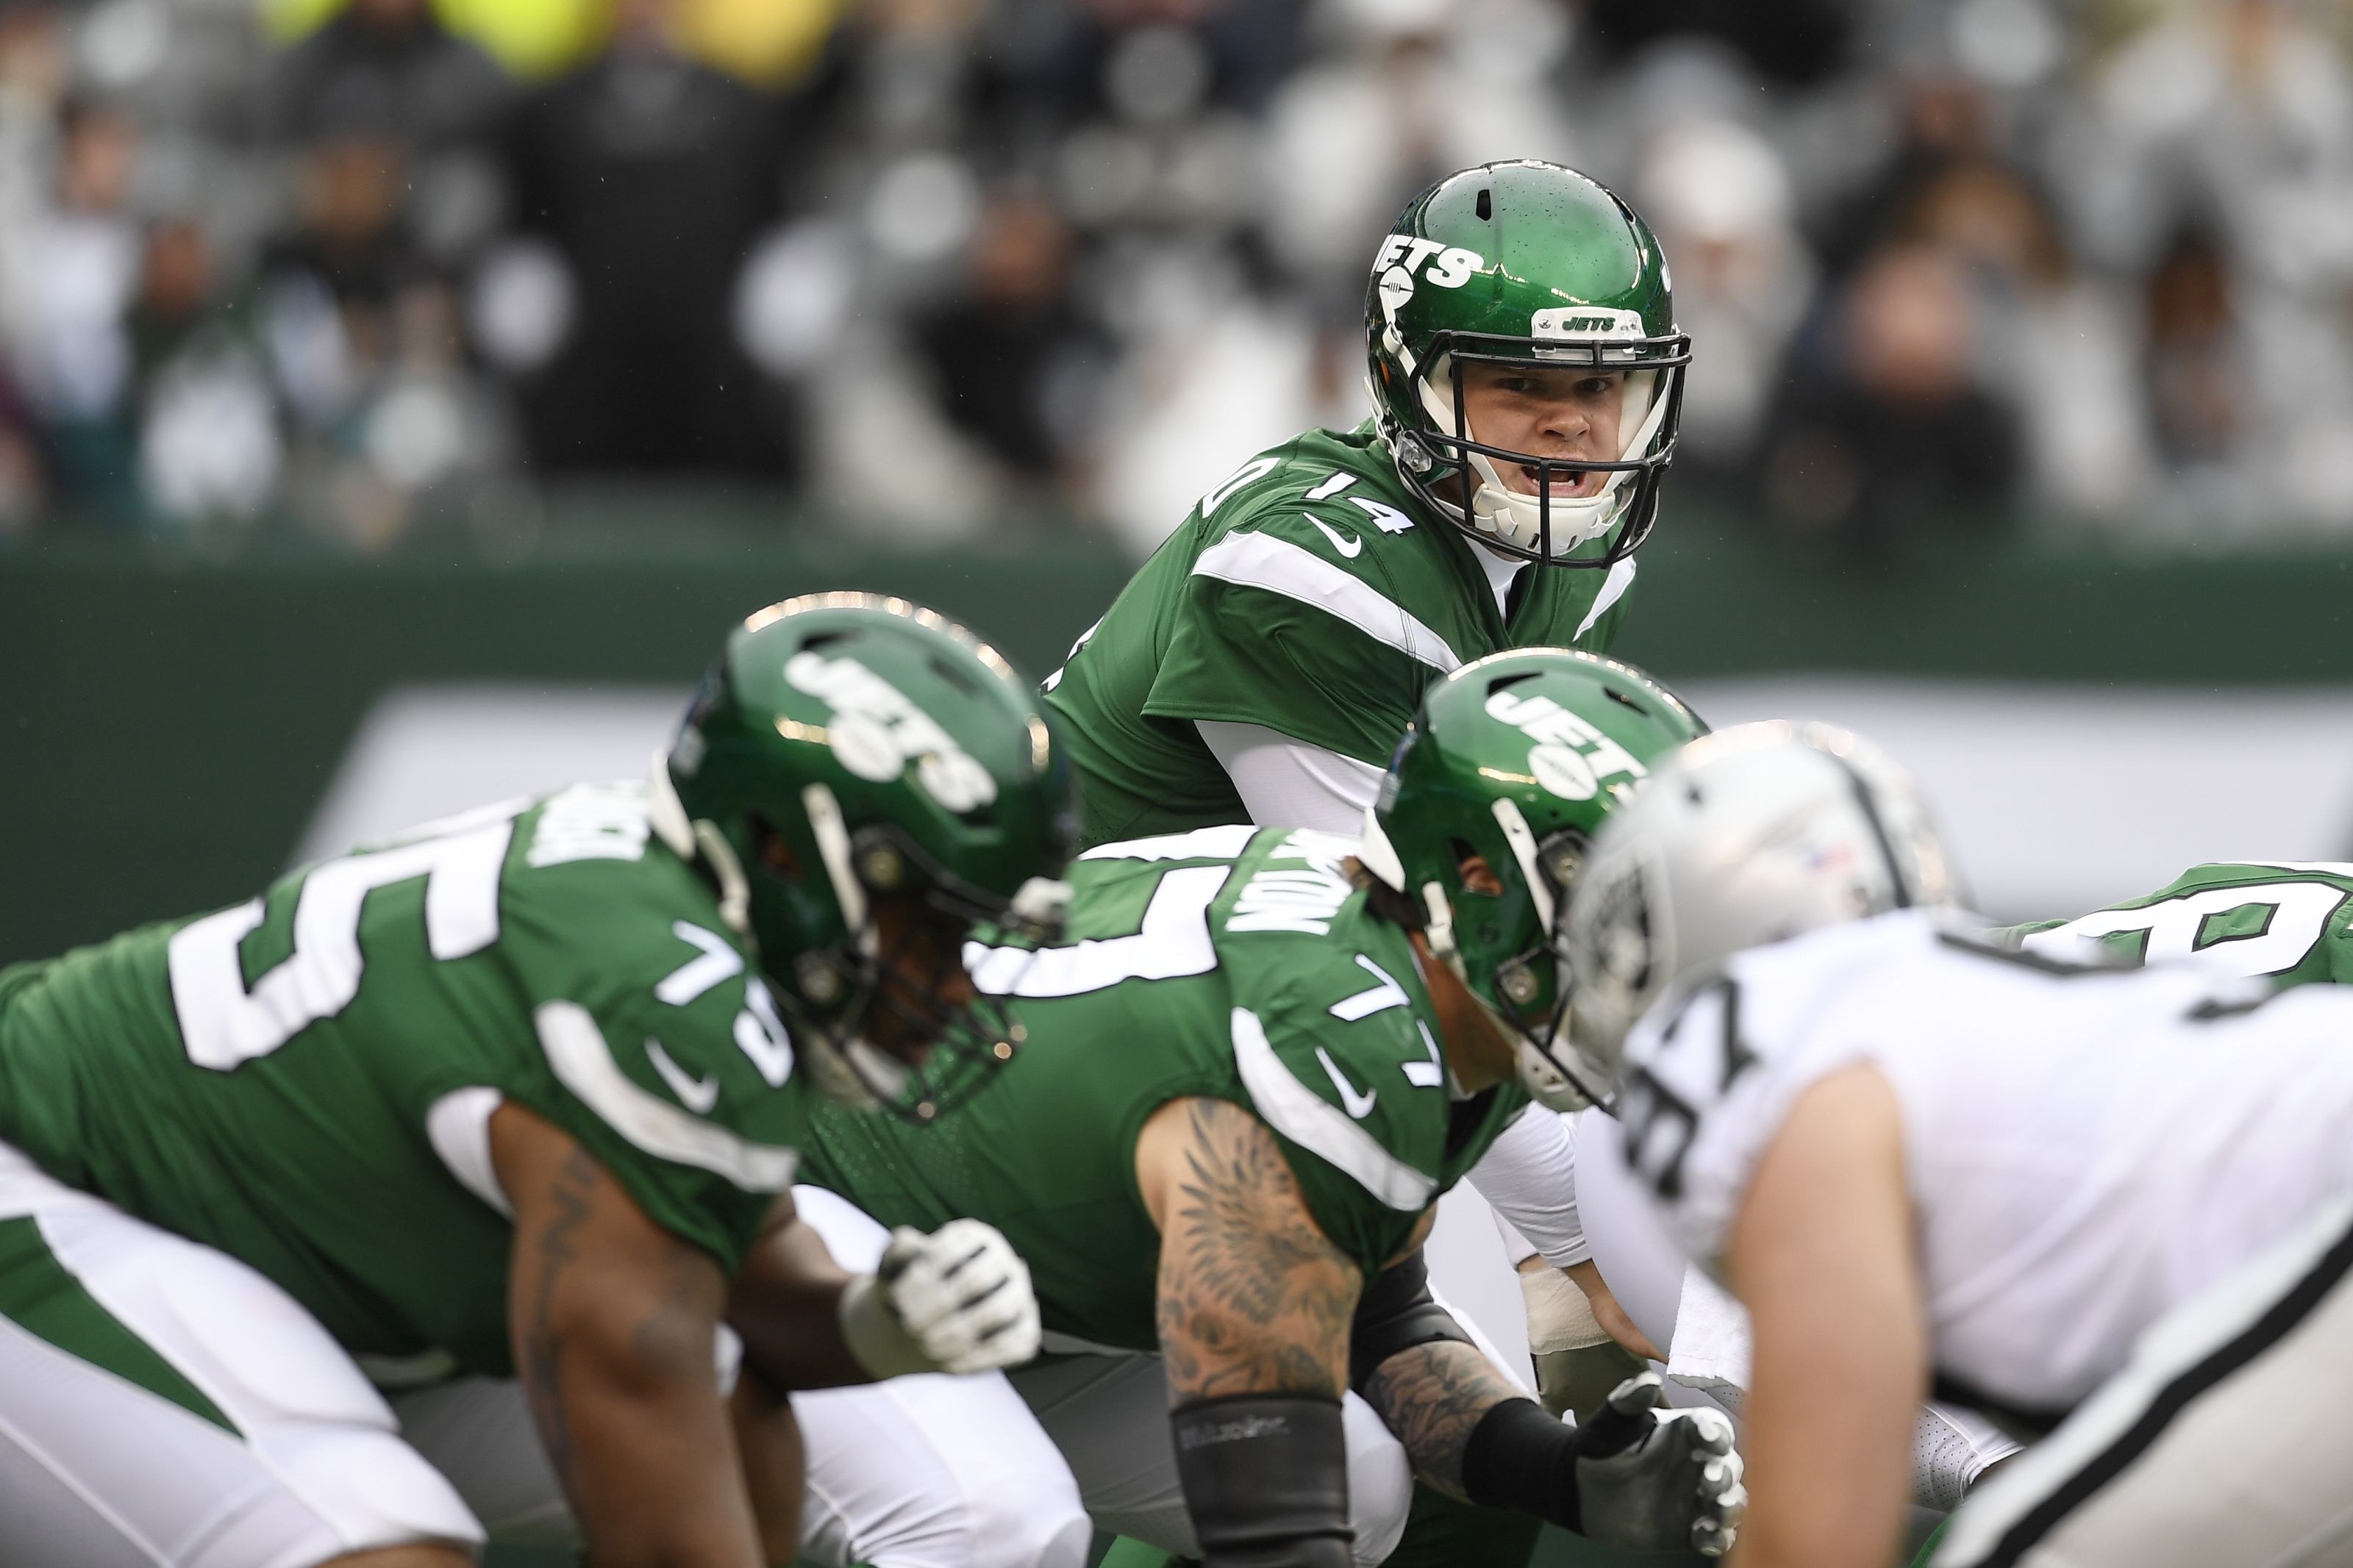 New York Jets plan on blowing up their offensive line this offseason